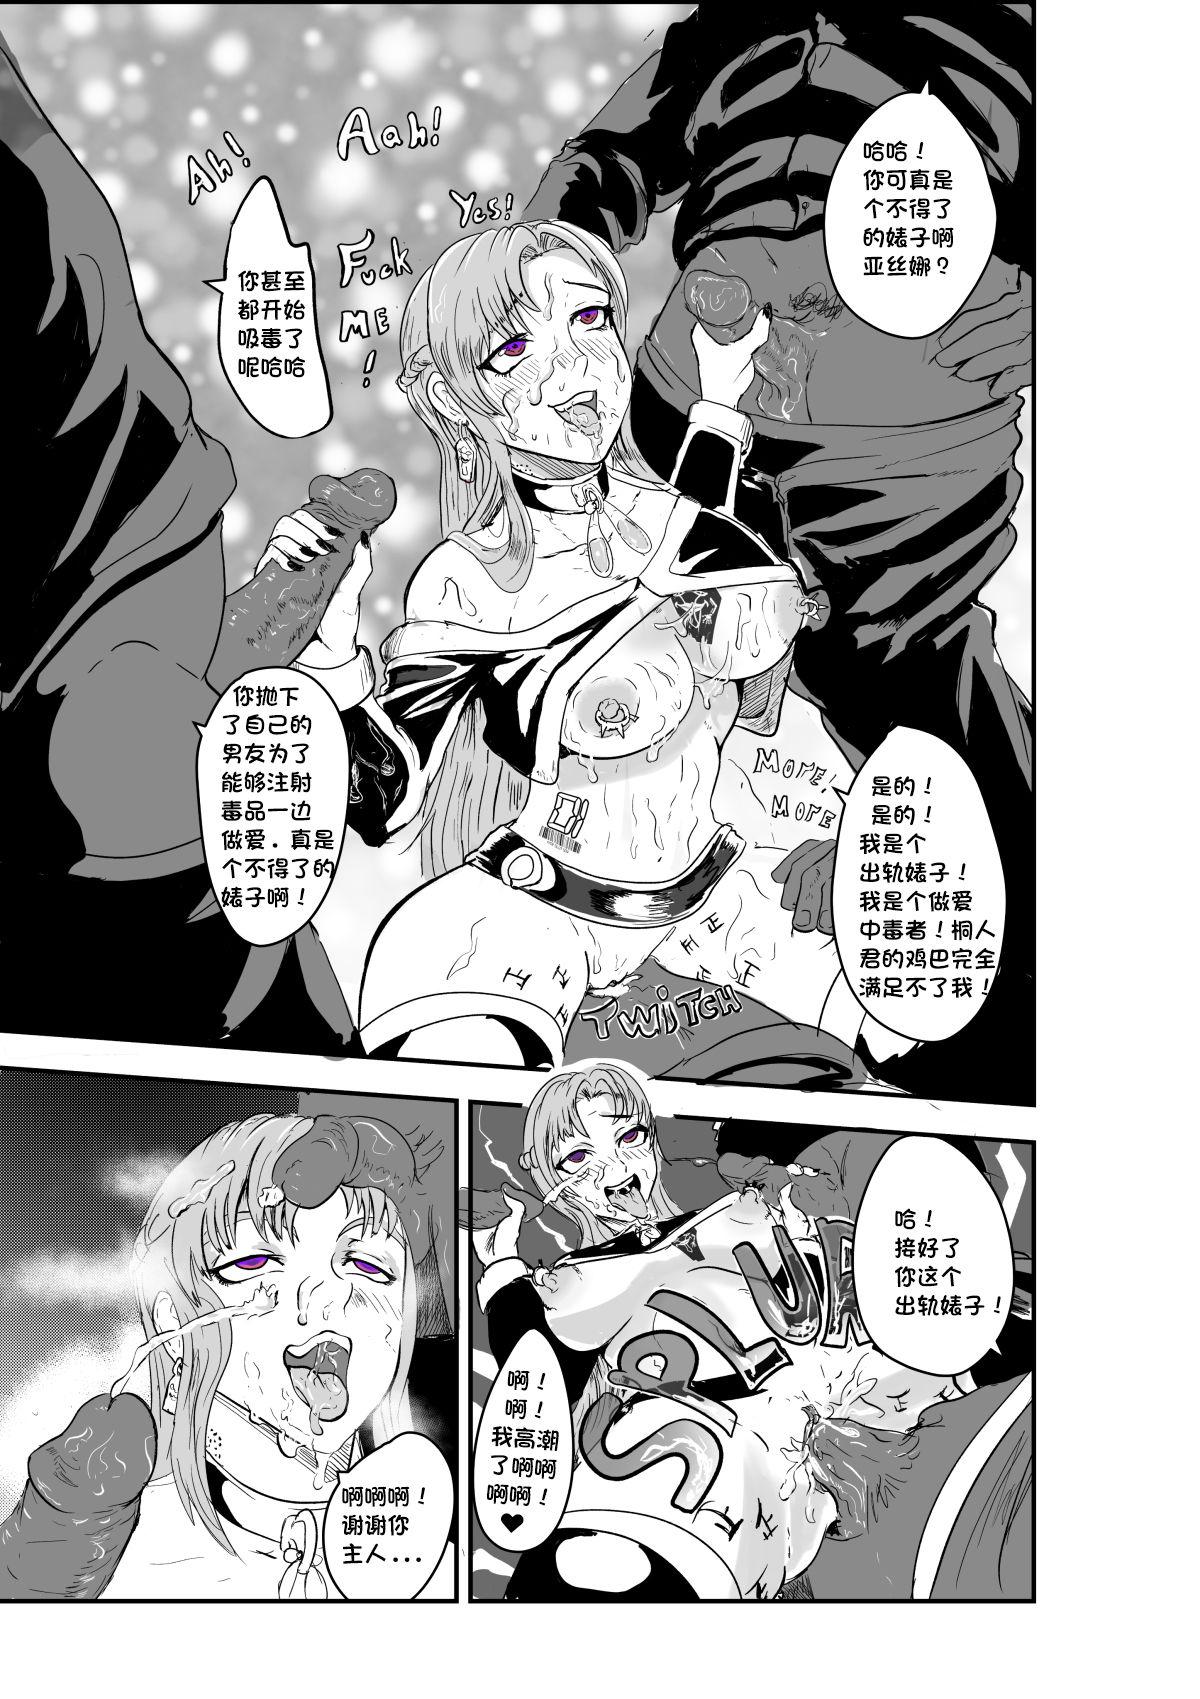 Lovers SAO Lustful Obedience Release - Sword art online Pervs - Page 5